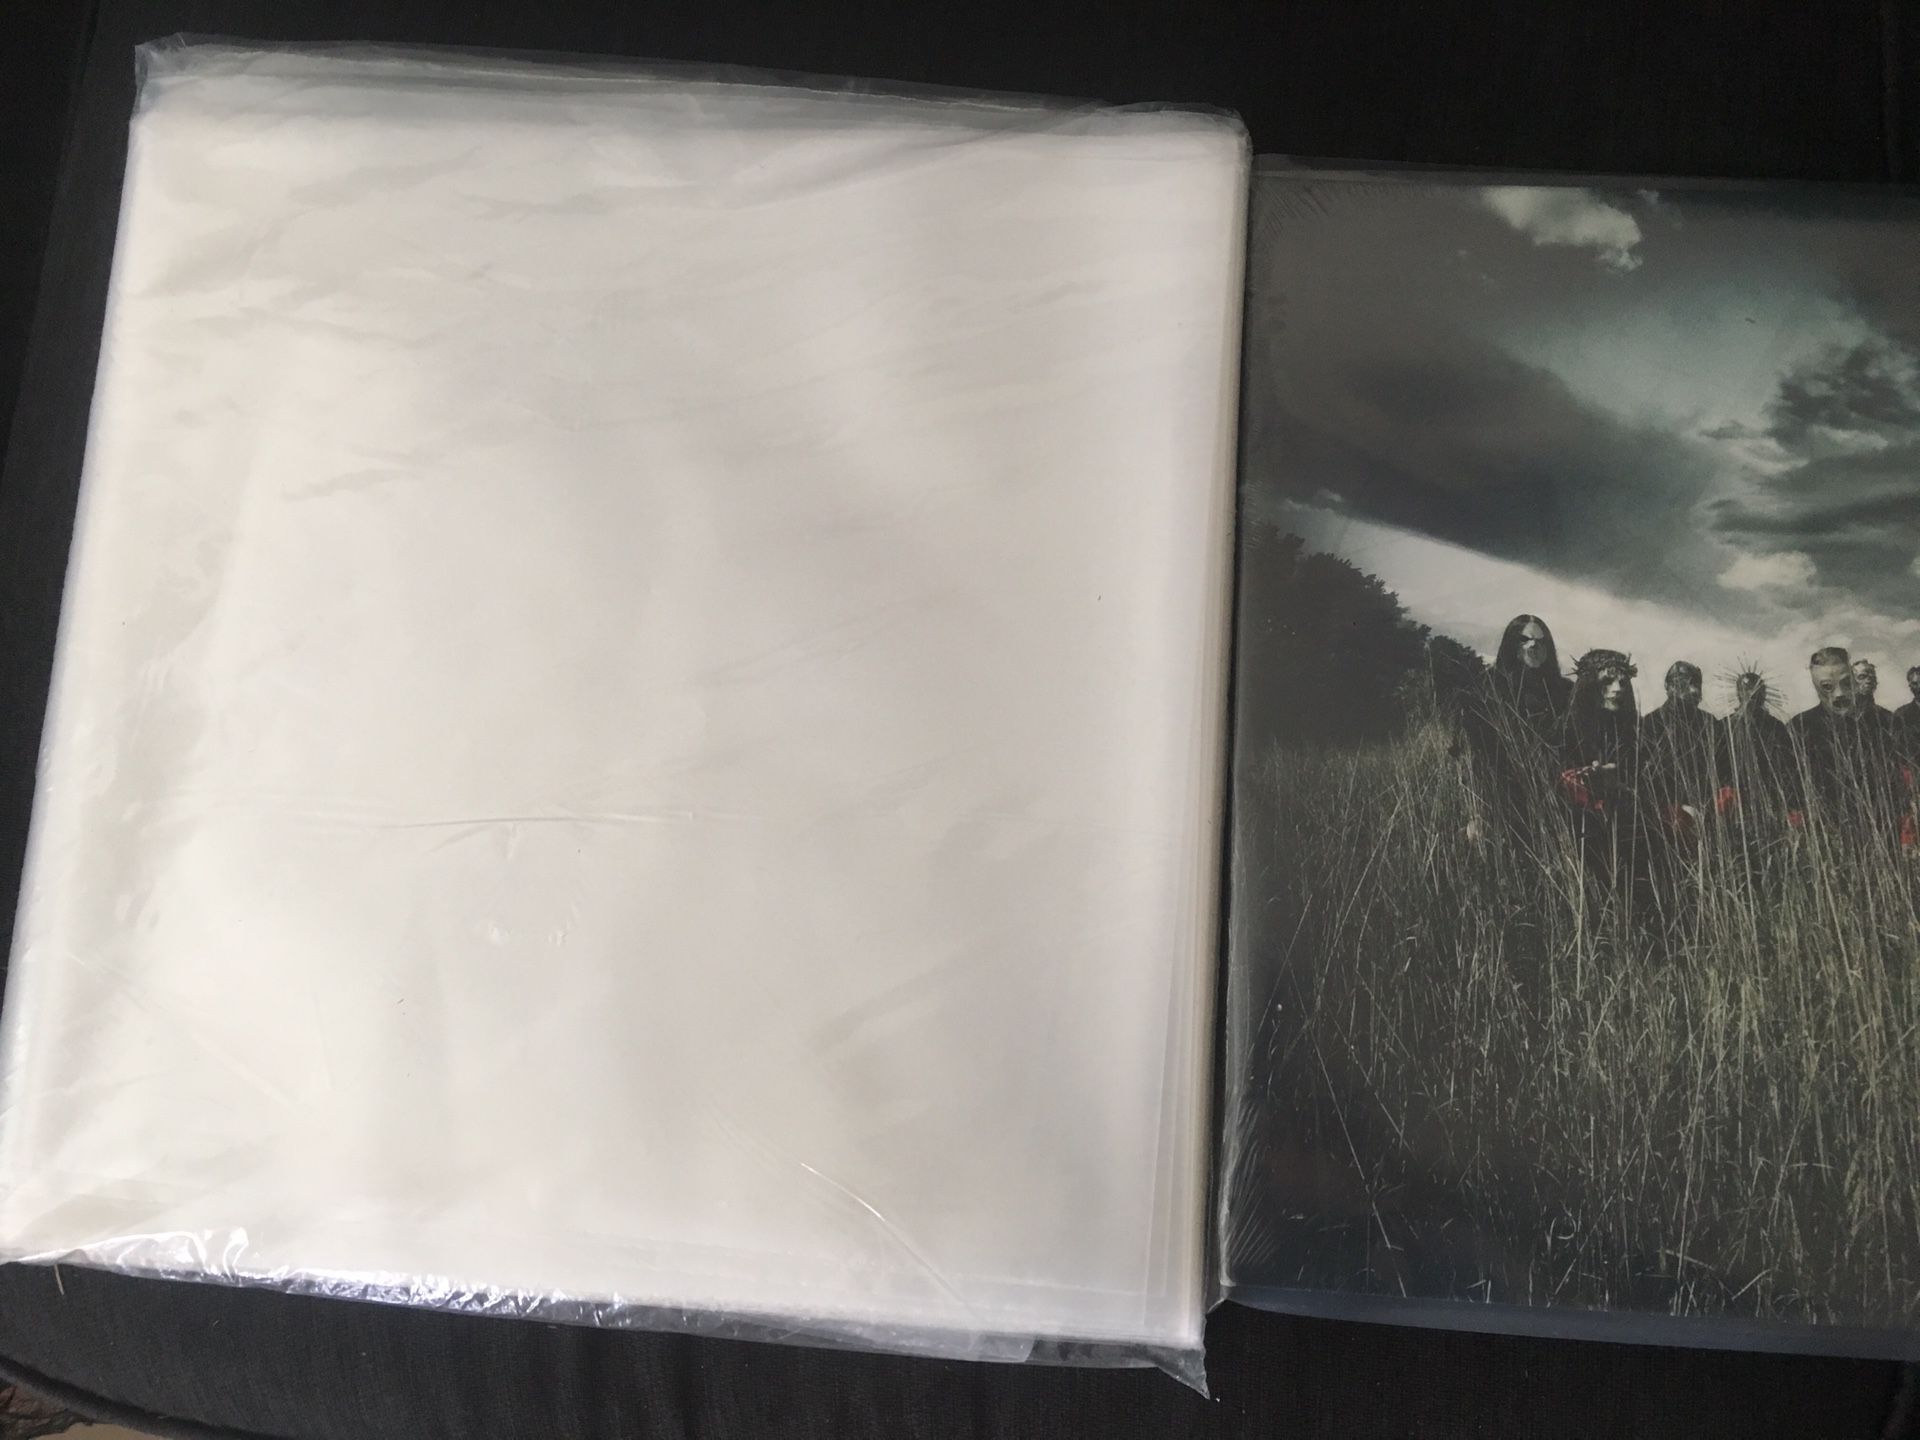 12” vinyl record clear sleeves